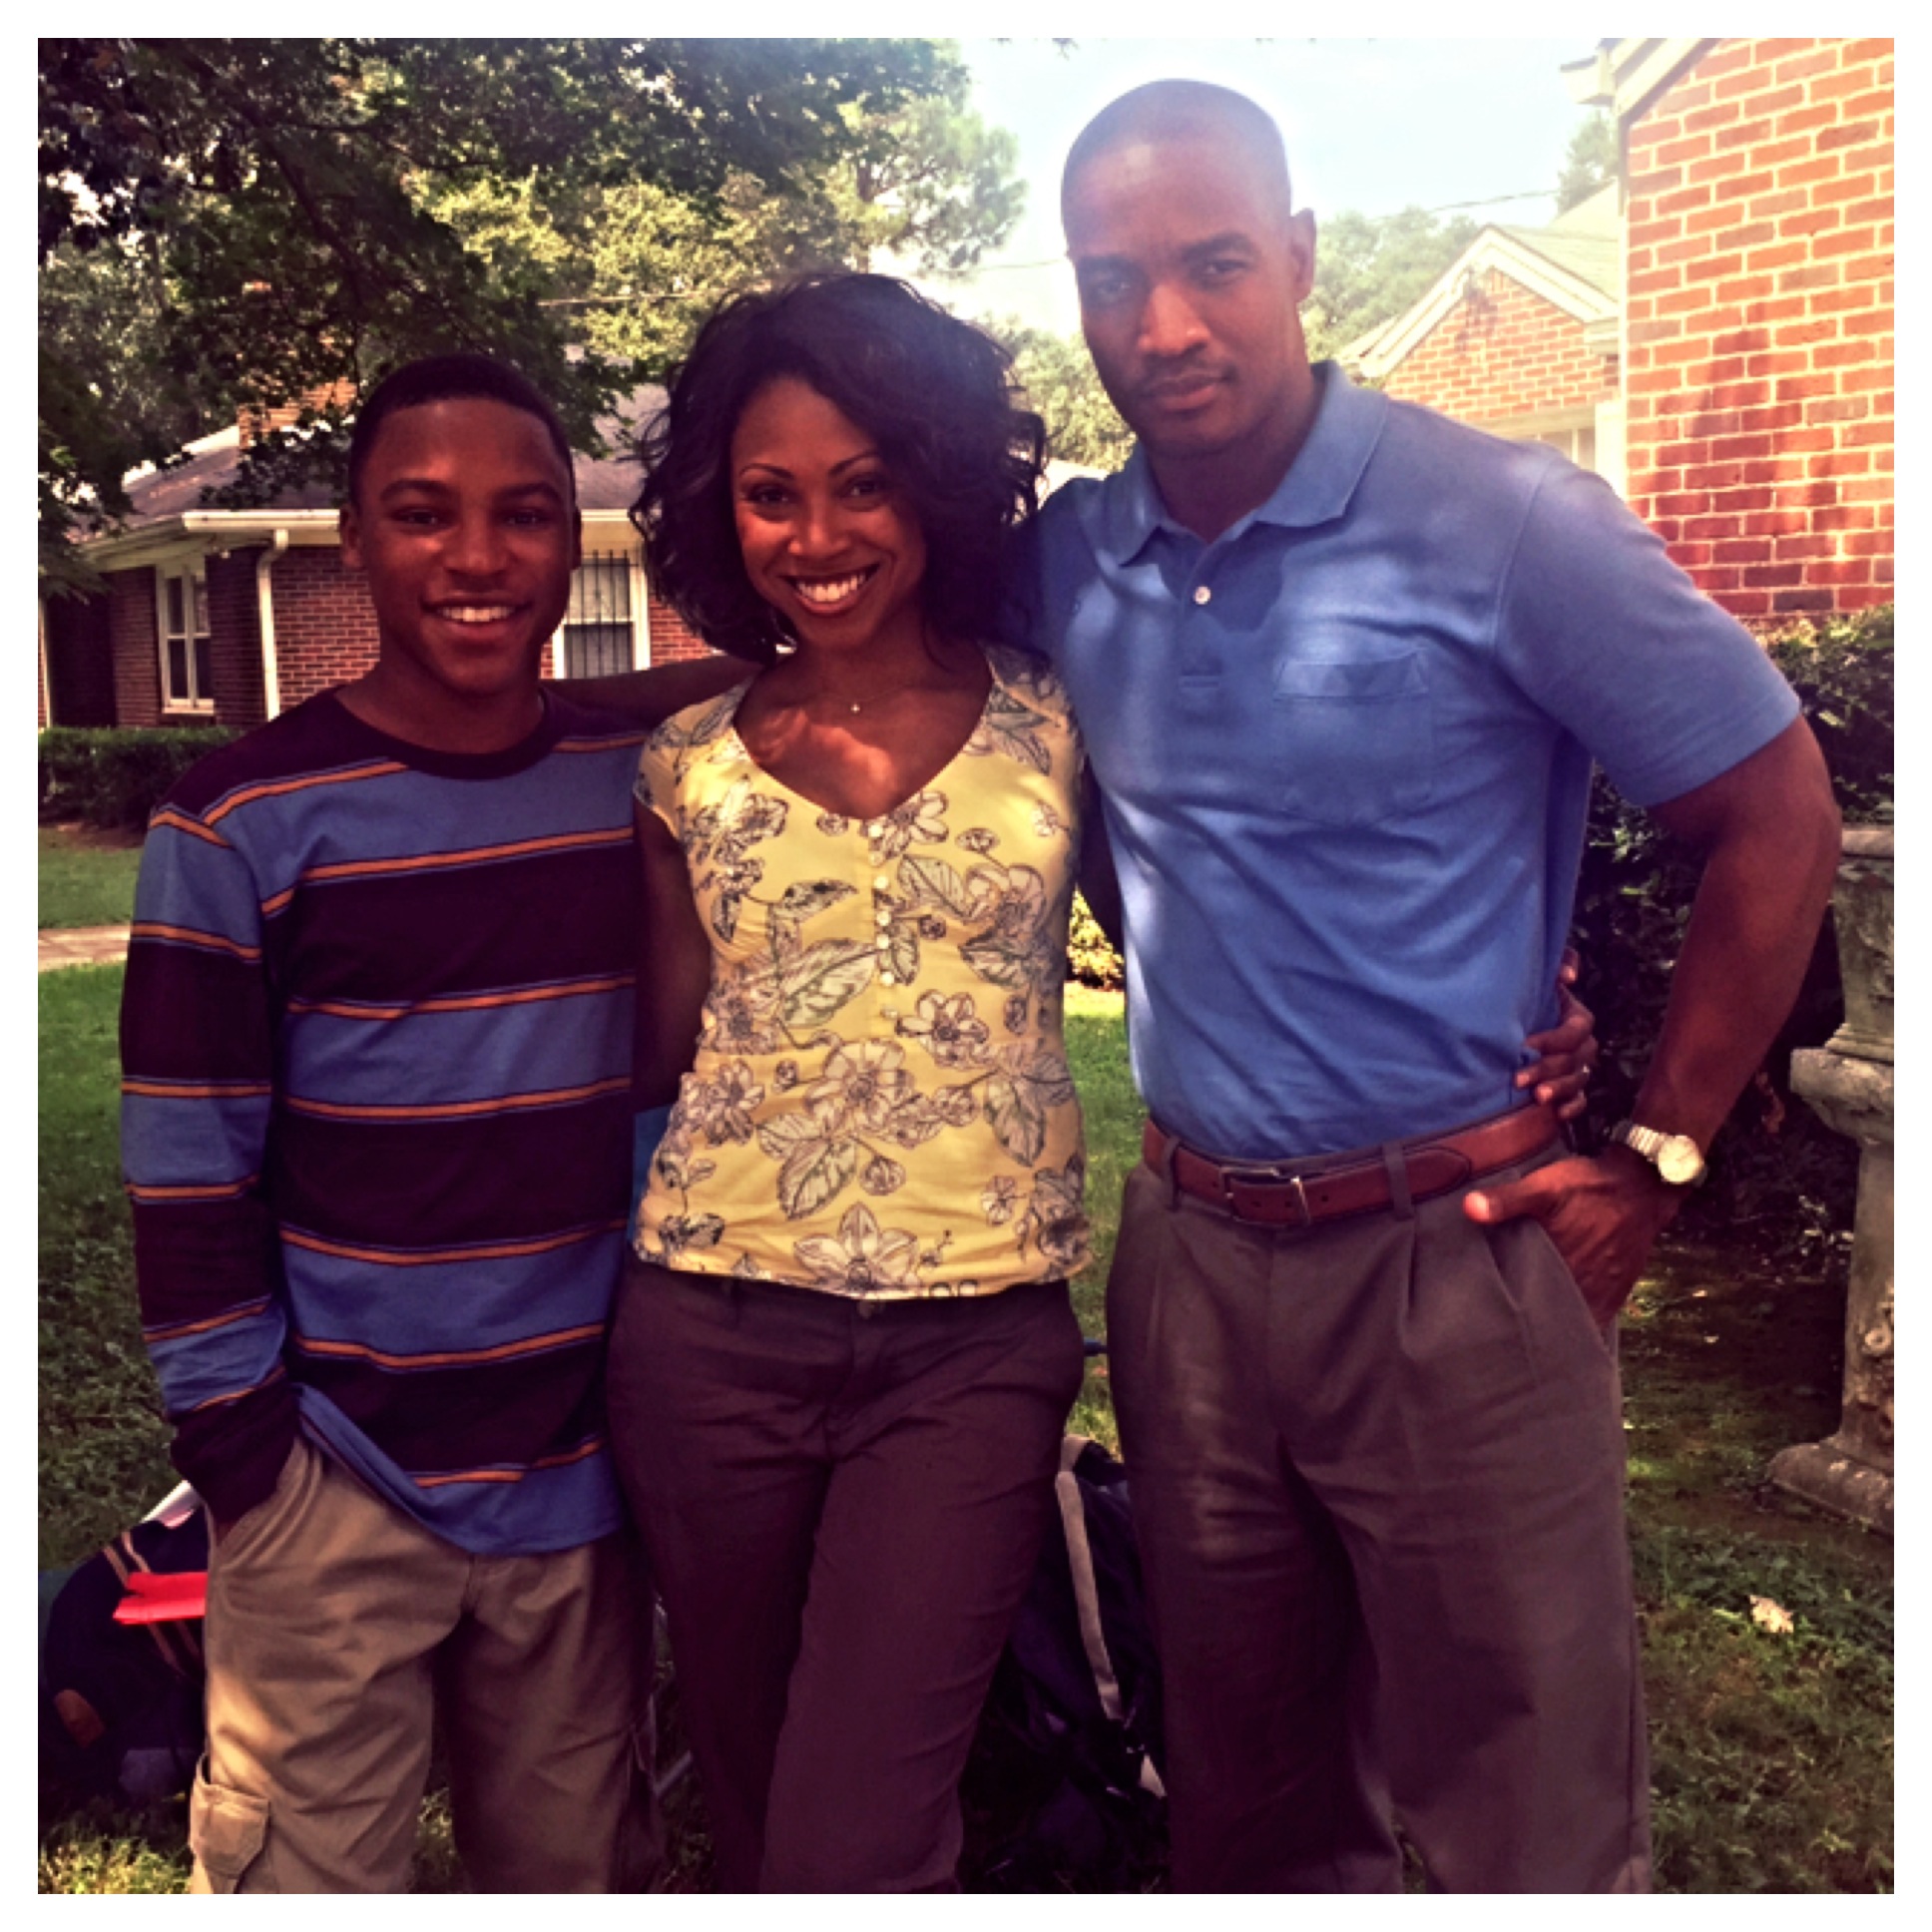 On location in Atlanta, Ga for NBC's 'Game of Silence.' Cranston was cast in the role of Tom Cook. He is pictured here with castmates McCarrie McCausland and Keena Ferguson.